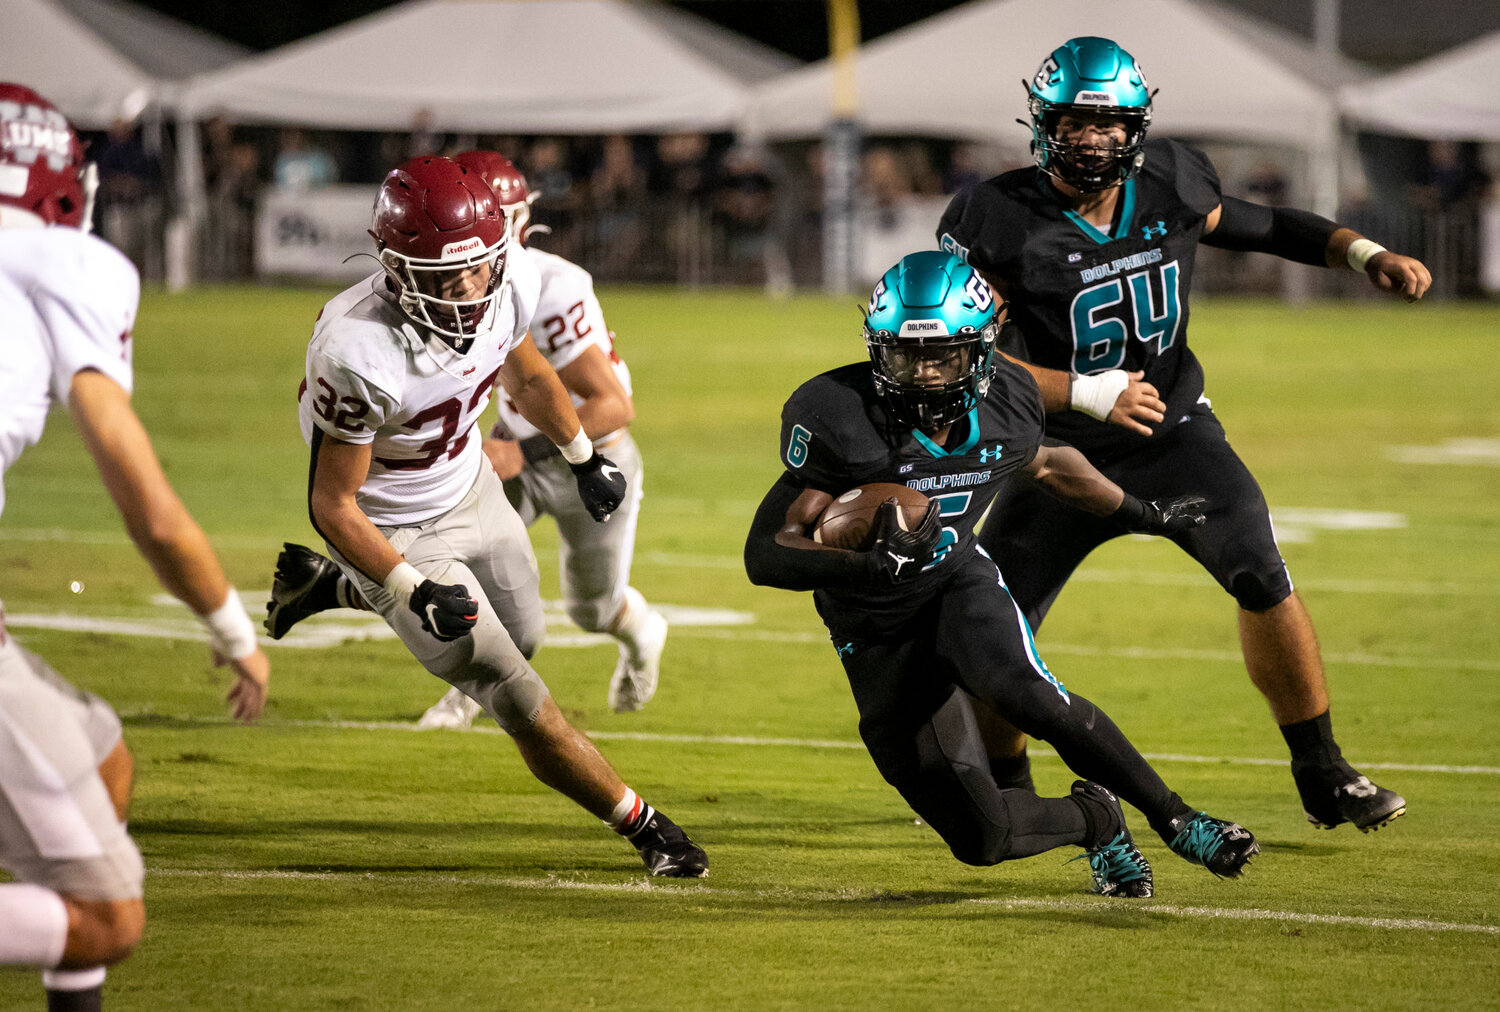 Kolin Wilson (6) makes a move in the second level during the Dolphins’ Class 5A Region 1 contest against the UMS-Wright Bulldogs at home on Friday night. Wilson finished with 46 rushing yards and a 1-yard touchdown run that helped Gulf Shores earn its first win in program history over UMS-Wright 17-0.